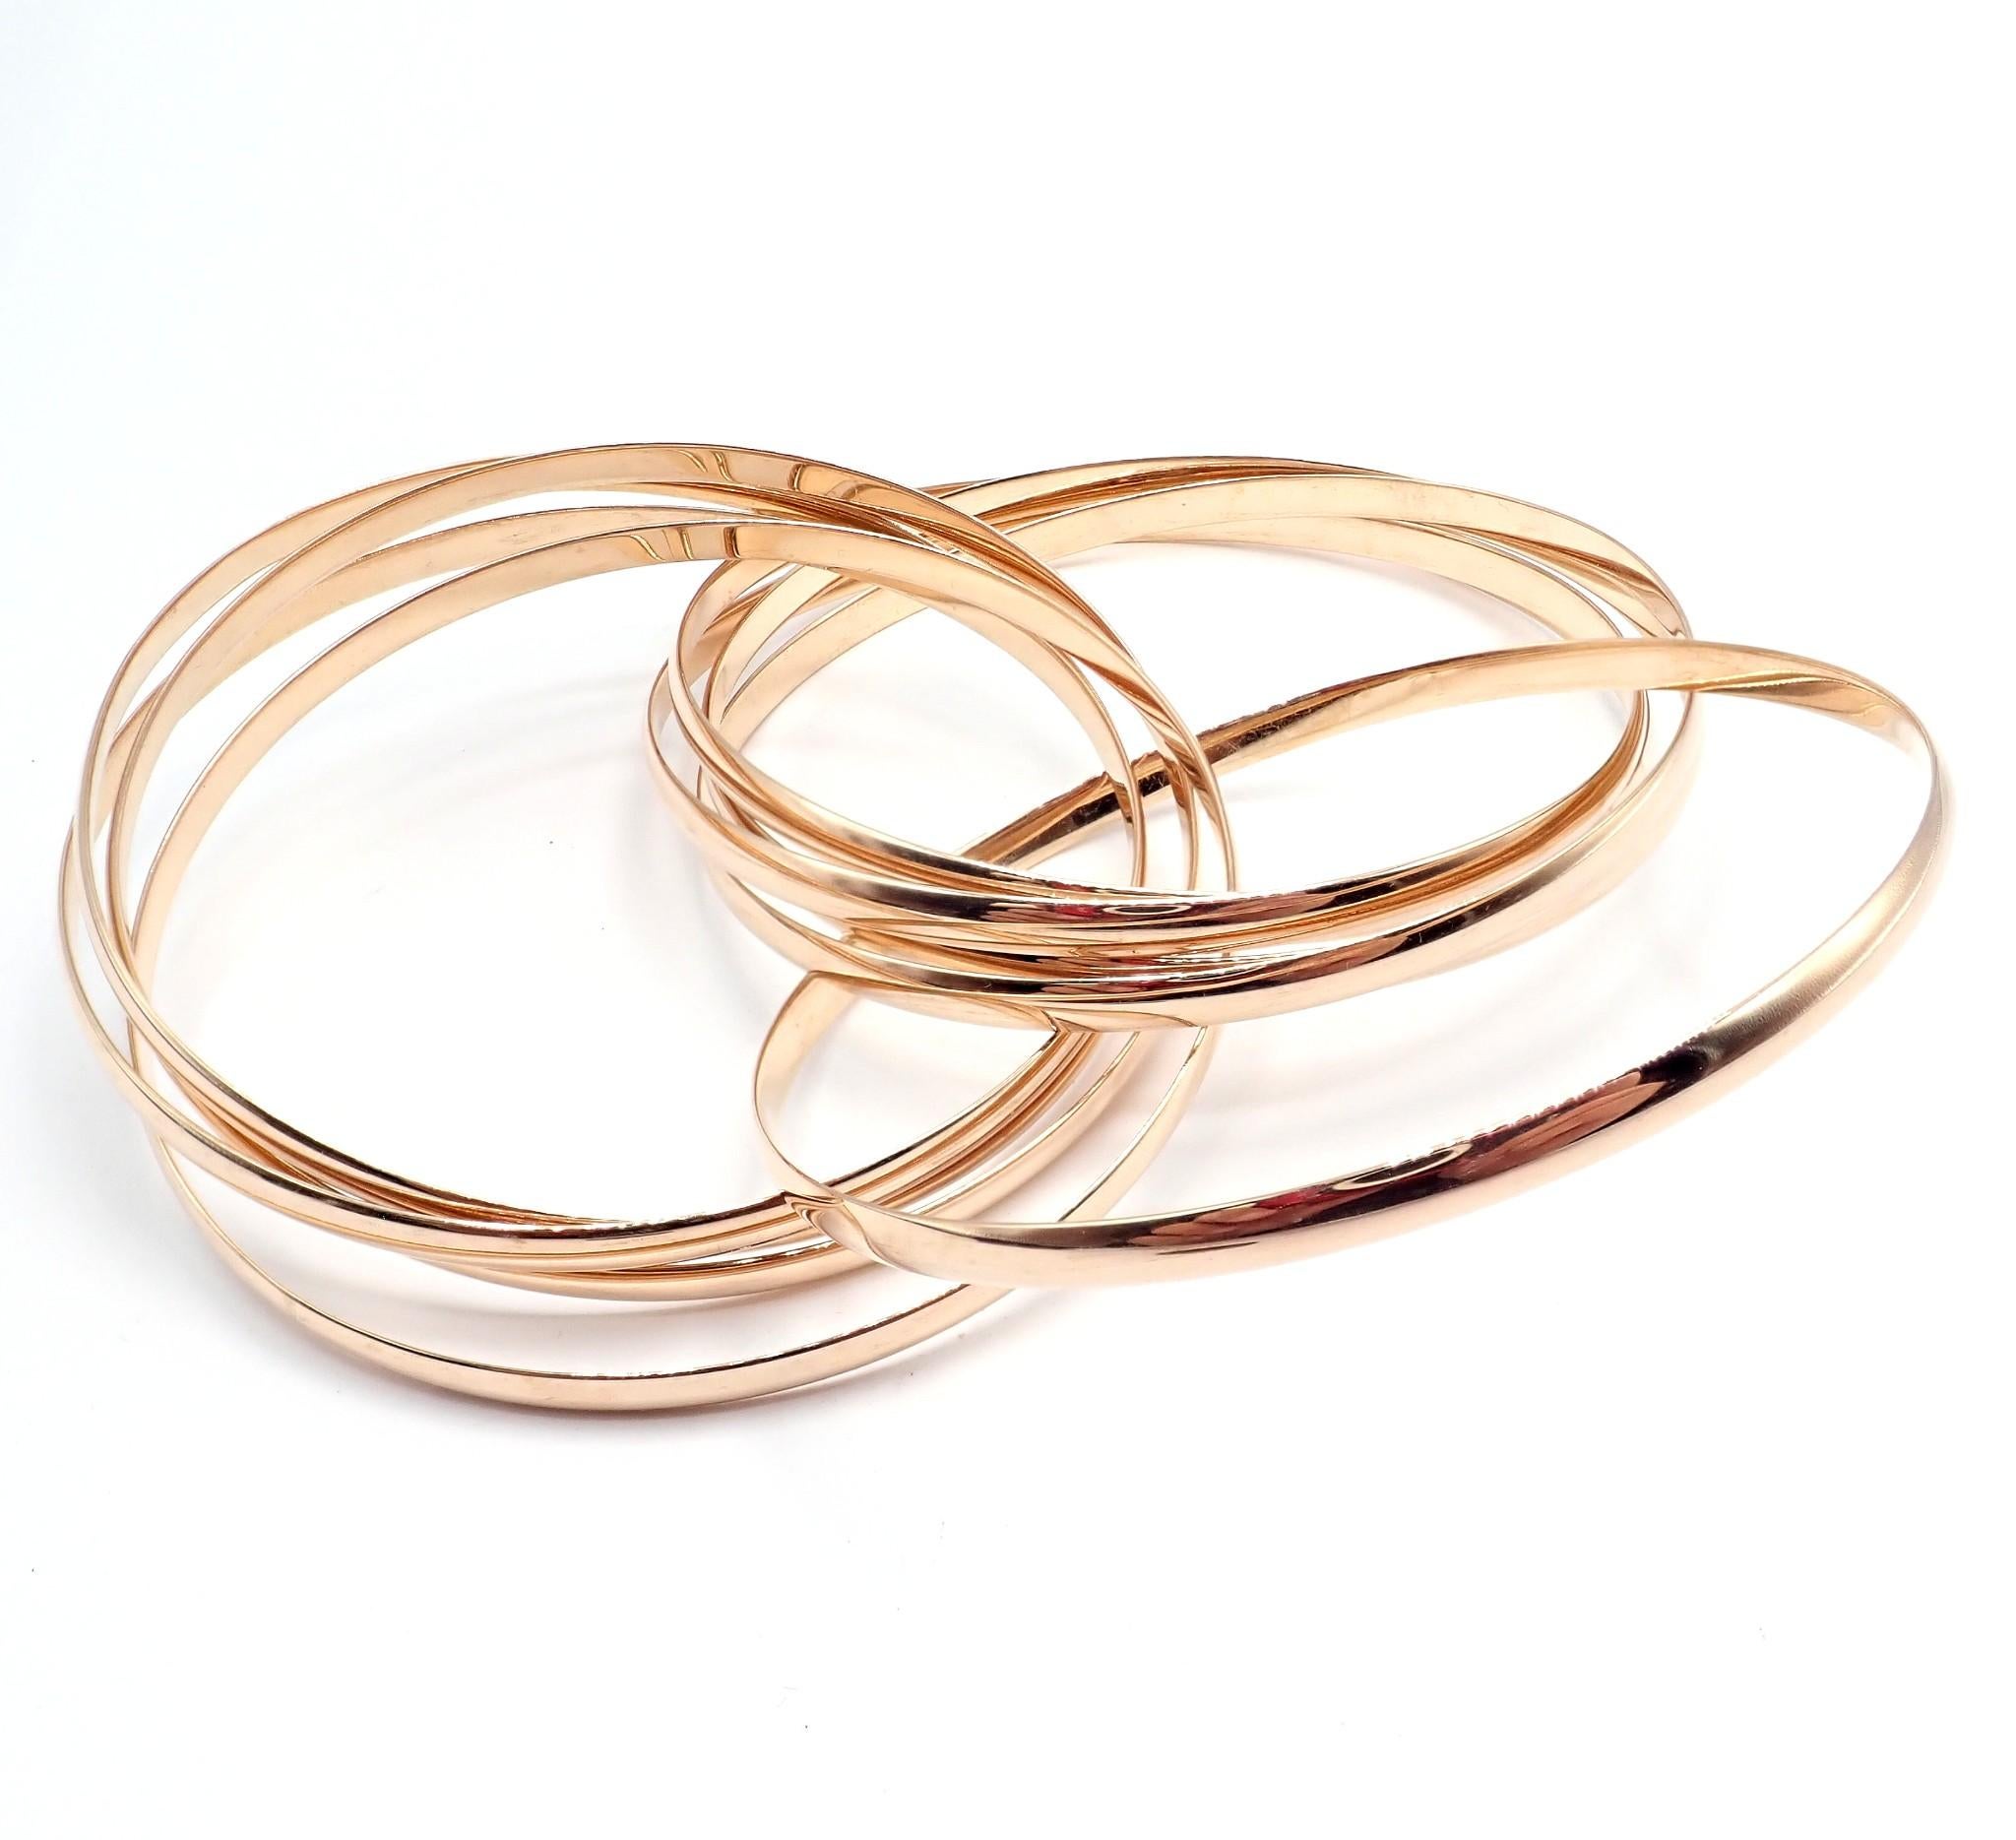 Tiffany & Co Rose Gold 9 Row Melody Calife Picasso Bangle Bracelet In Excellent Condition For Sale In Holland, PA